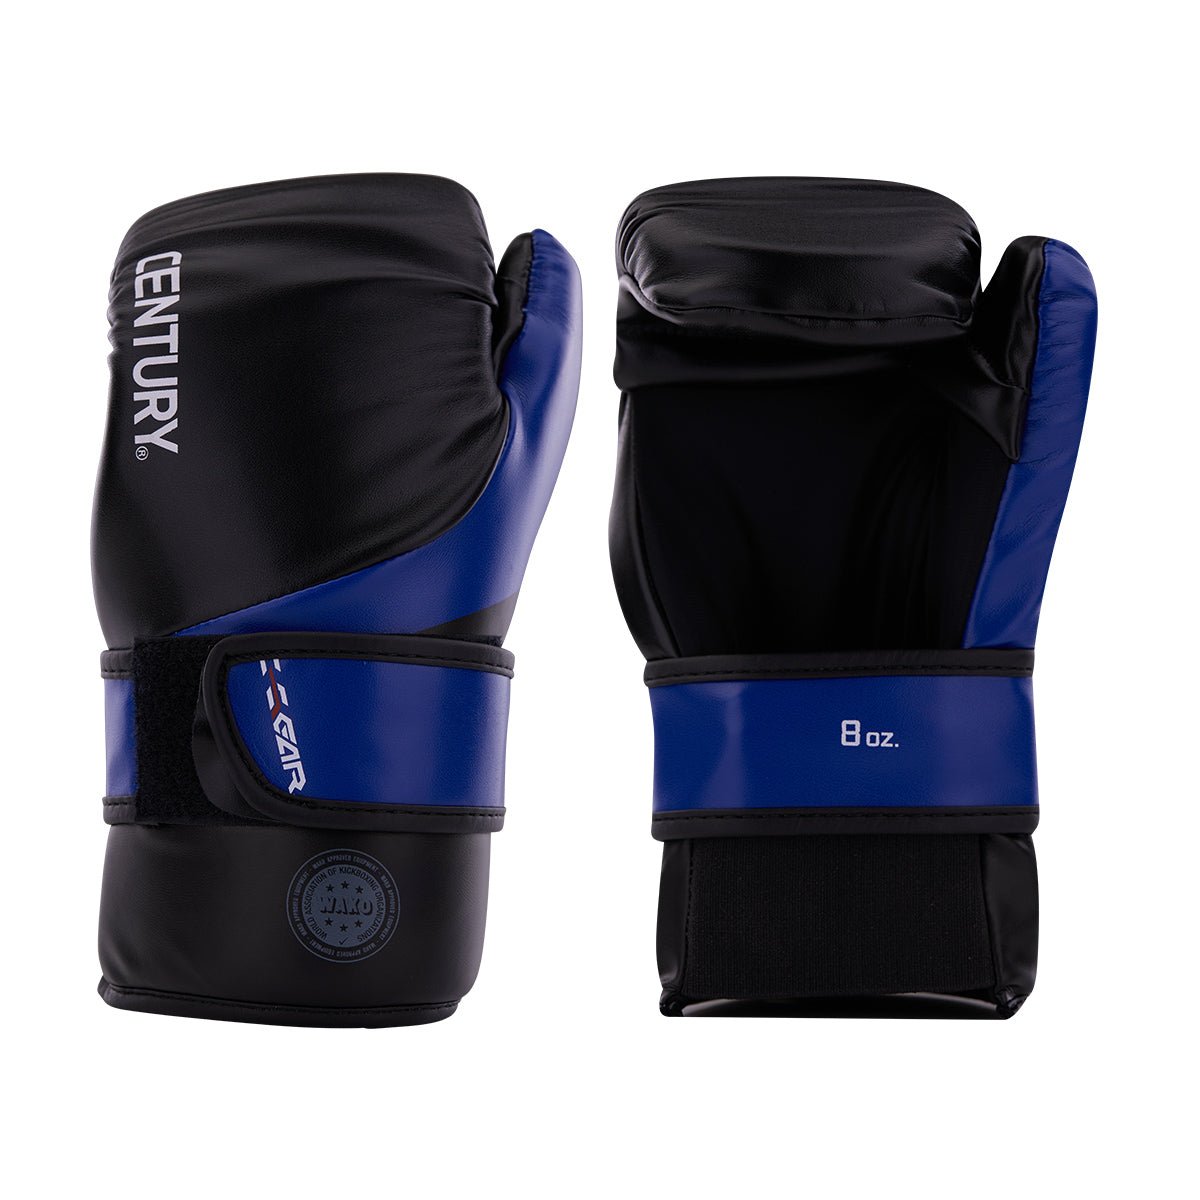 C-Gear Determination Point Fighting Punches Black Blue